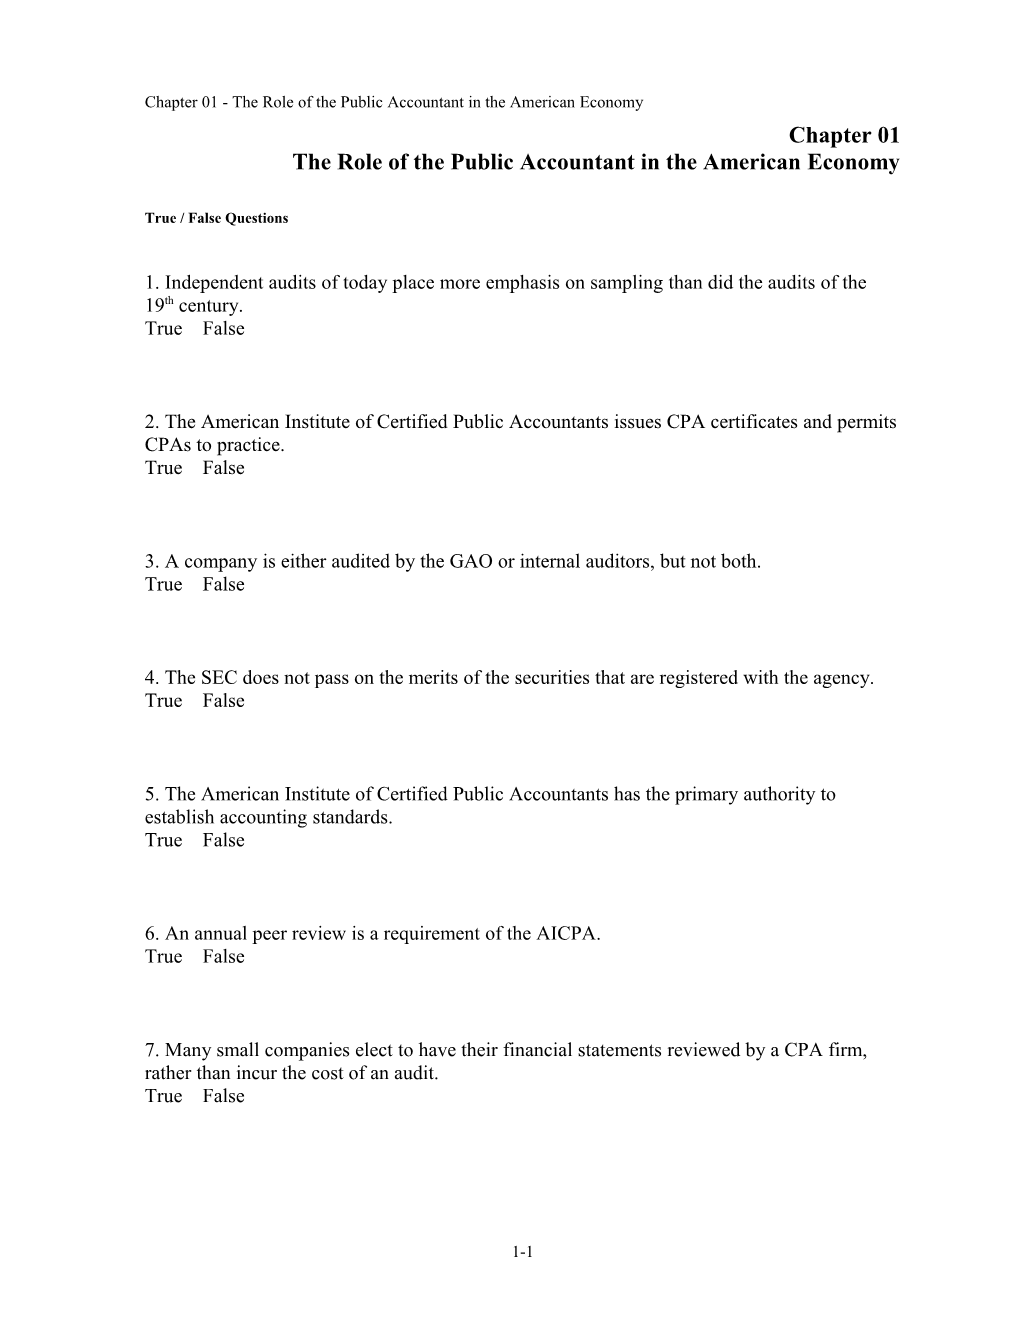 Chapter 01 The Role Of The Public Accountant In The American Economy